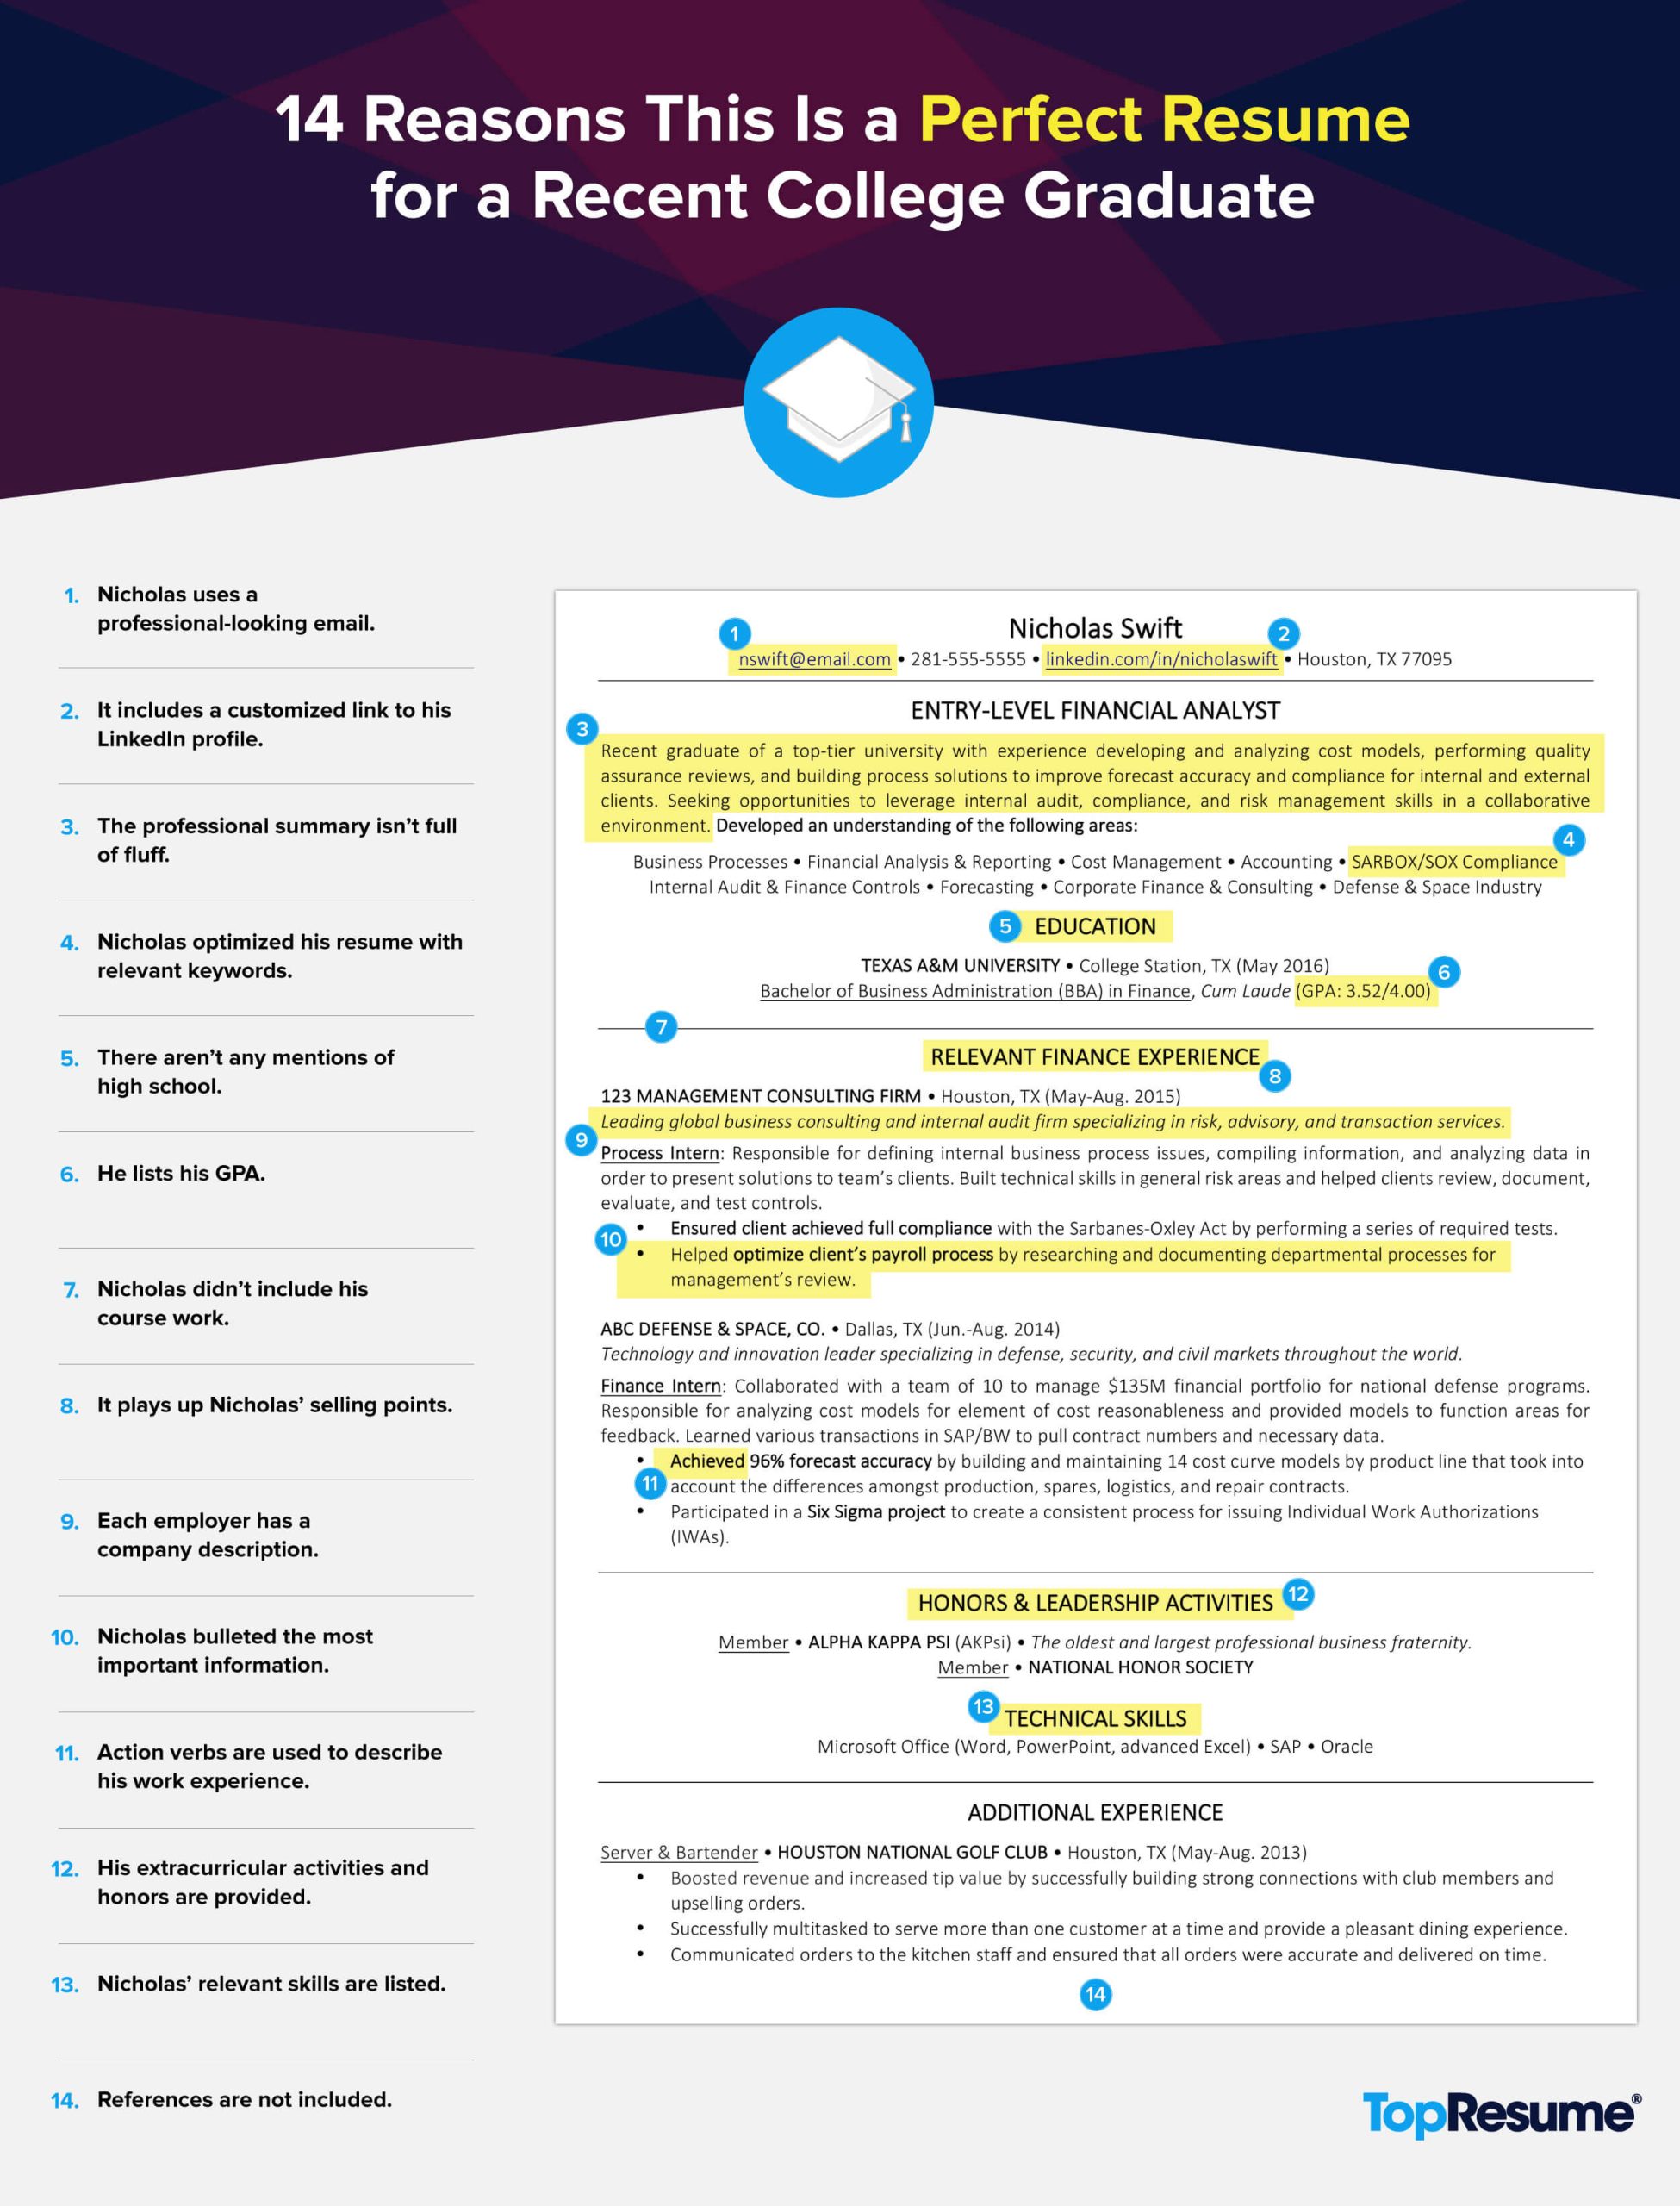 Sample Resume for Graduate College Application 14 Reasons This is A Perfect Recent College Graduate Resume …